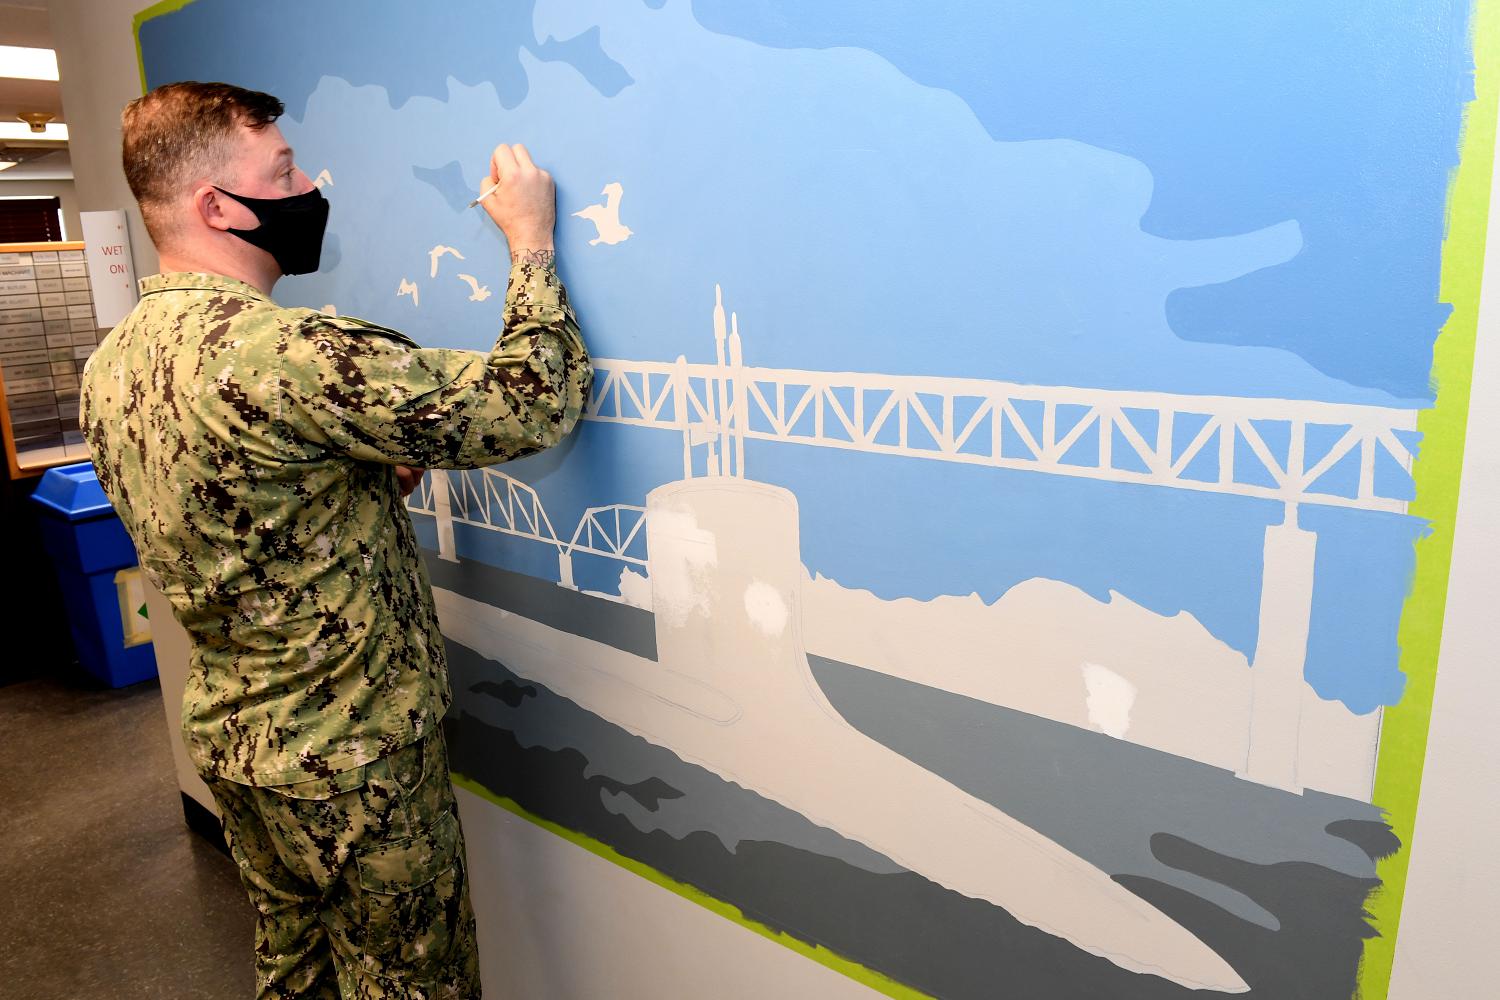 210224-N-GR655-057 GROTON, Conn. (February 24, 2021) – Petty Officer 1st Class Jamie Pearson, a Machinist’s Mate (Auxiliary) assigned to Naval Submarine Support Facility New London, paints a mural on an office wall at his command. Pearson has been moonlighting as an artist on and off base in the Groton community since 2014. (photo by Chief Petty Officer Joshua Karsten/RELEASED)